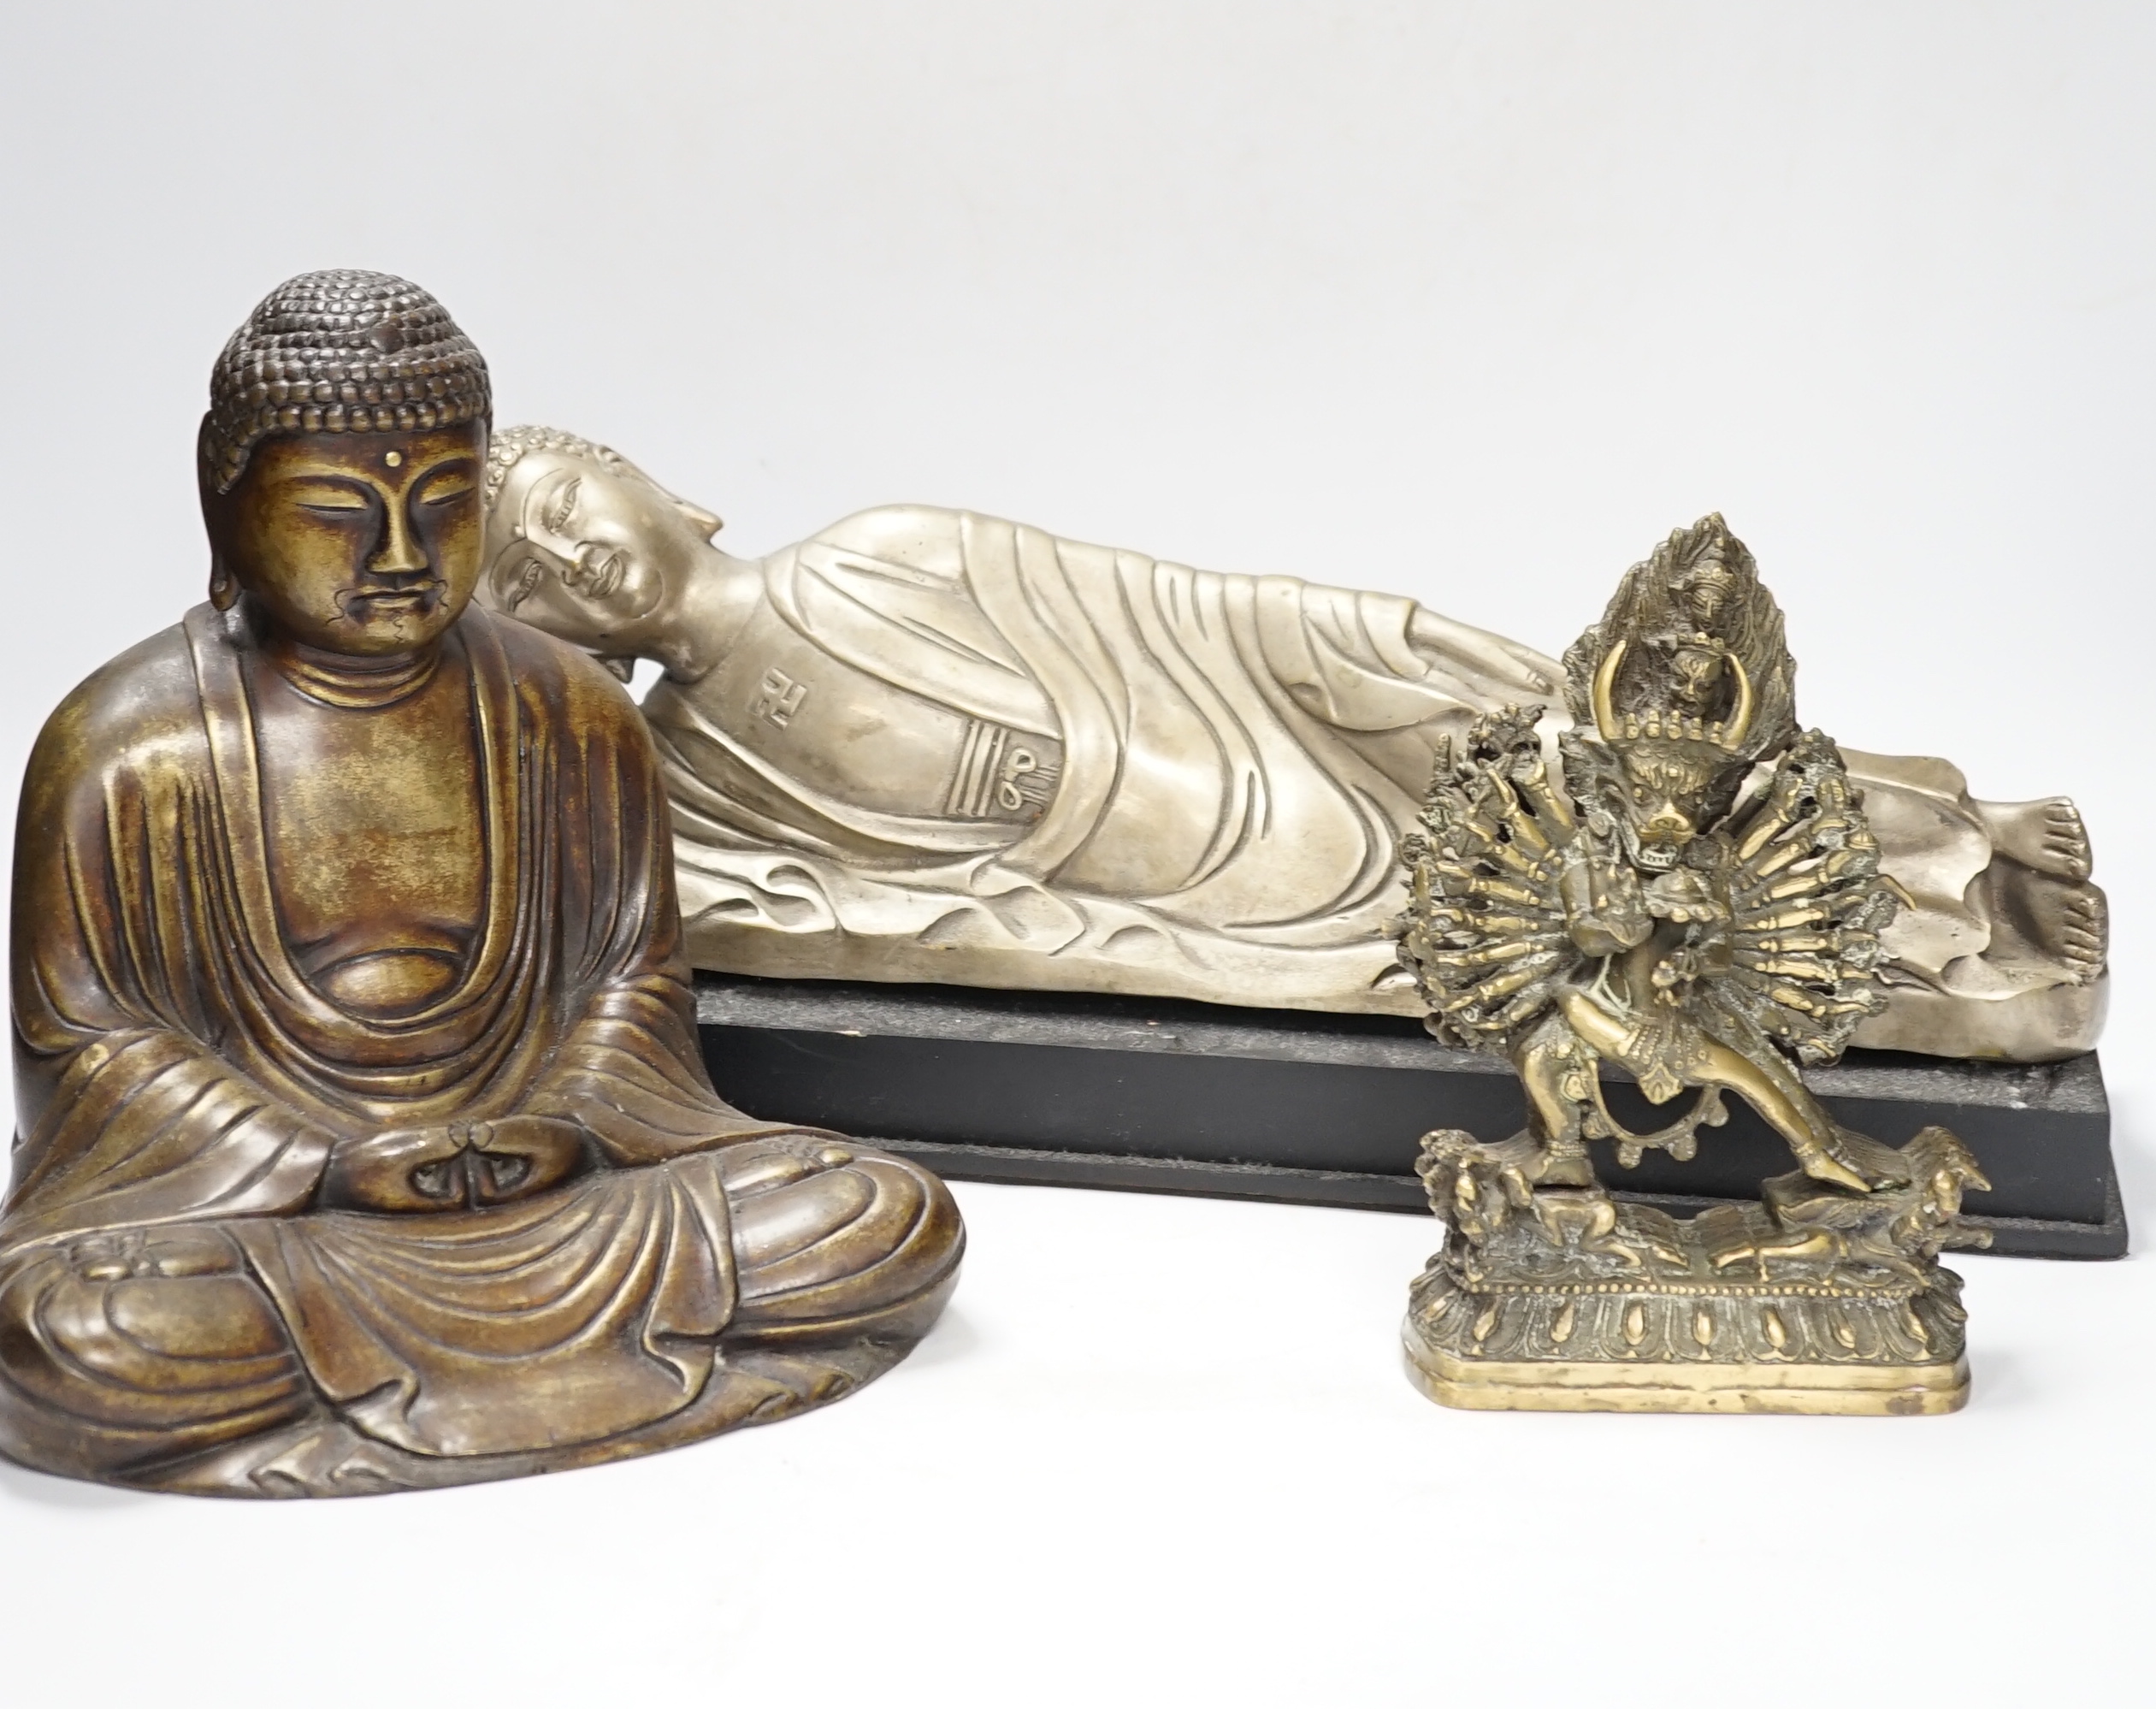 Three bronze and other metal figures of the Buddha and a Tibetan figure of Yamantaka, tallest 21.5cm